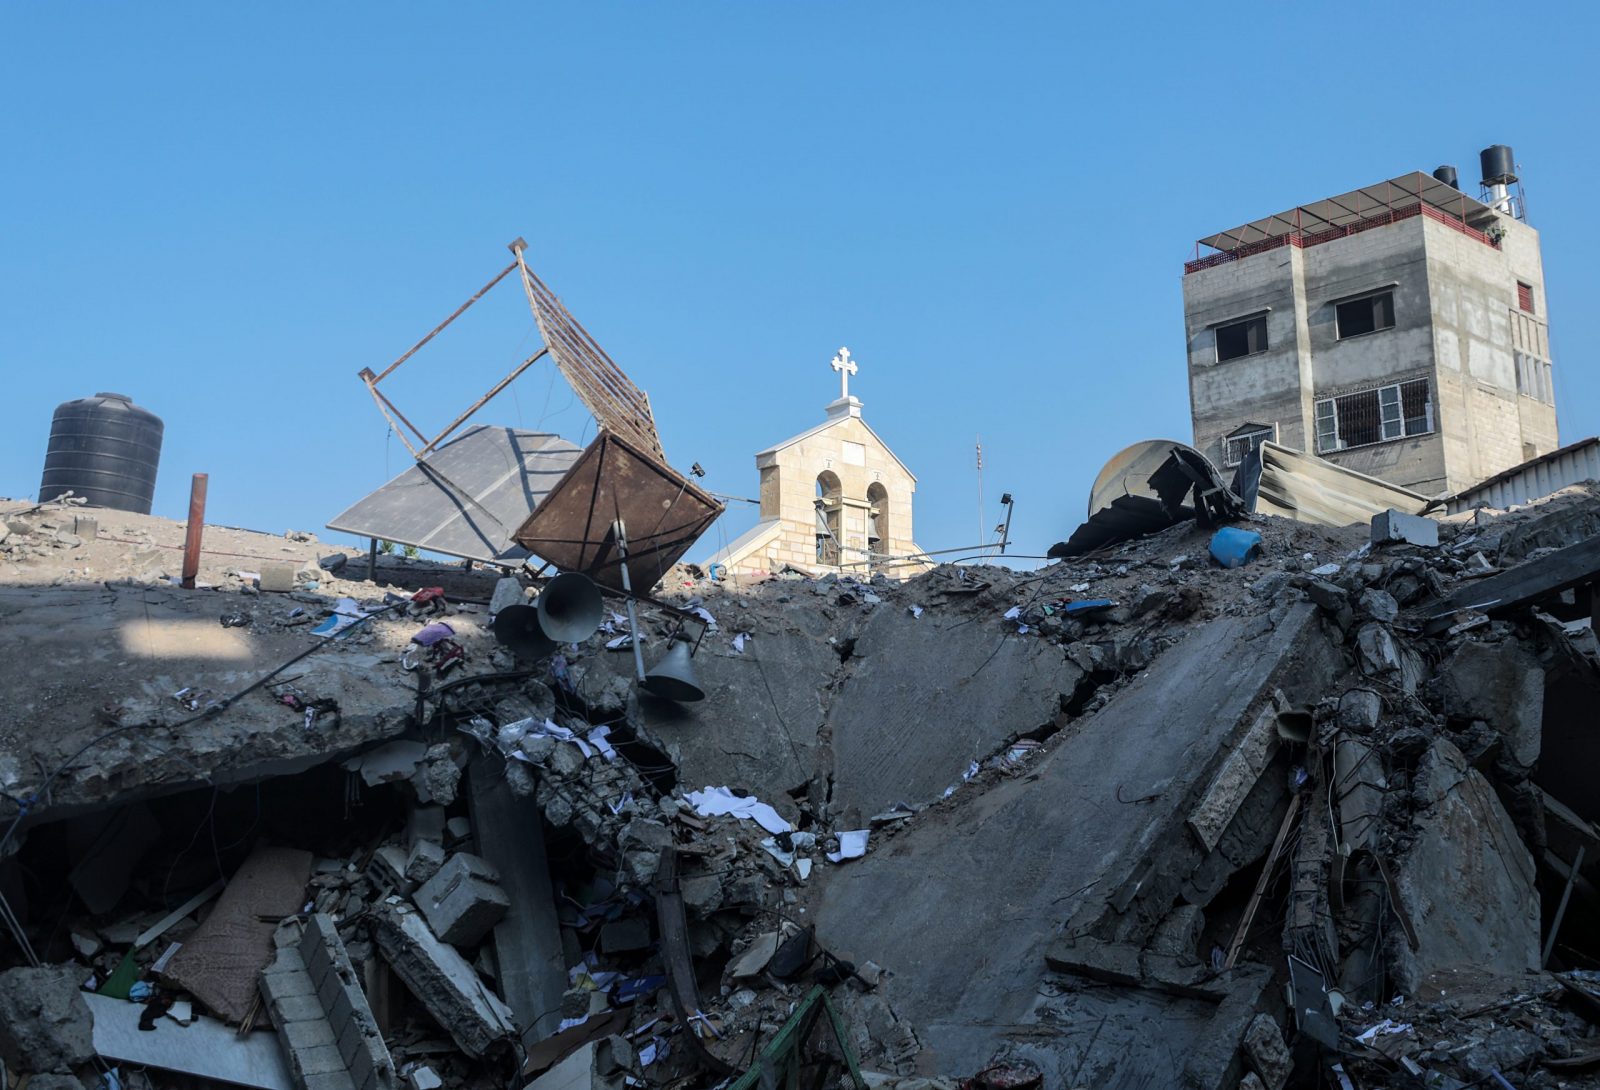 epa10928617 The damaged Greek Orthodox Saint Porphyrius Church following an overnight airstrike in Gaza, 20 October 2023. At least 18 people were killed, according to Palestinian authorities in Gaza. More than 3,700 Palestinians and 1,400 Israelis have been killed according to the Israel Defense Forces (IDF) and the Palestinian health authority since Hamas militants launched an attack against Israel from the Gaza Strip on 07 October. Israel has warned all citizens of the Gaza Strip to move to the south ahead of an expected invasion.  EPA/MOHAMMED SABER